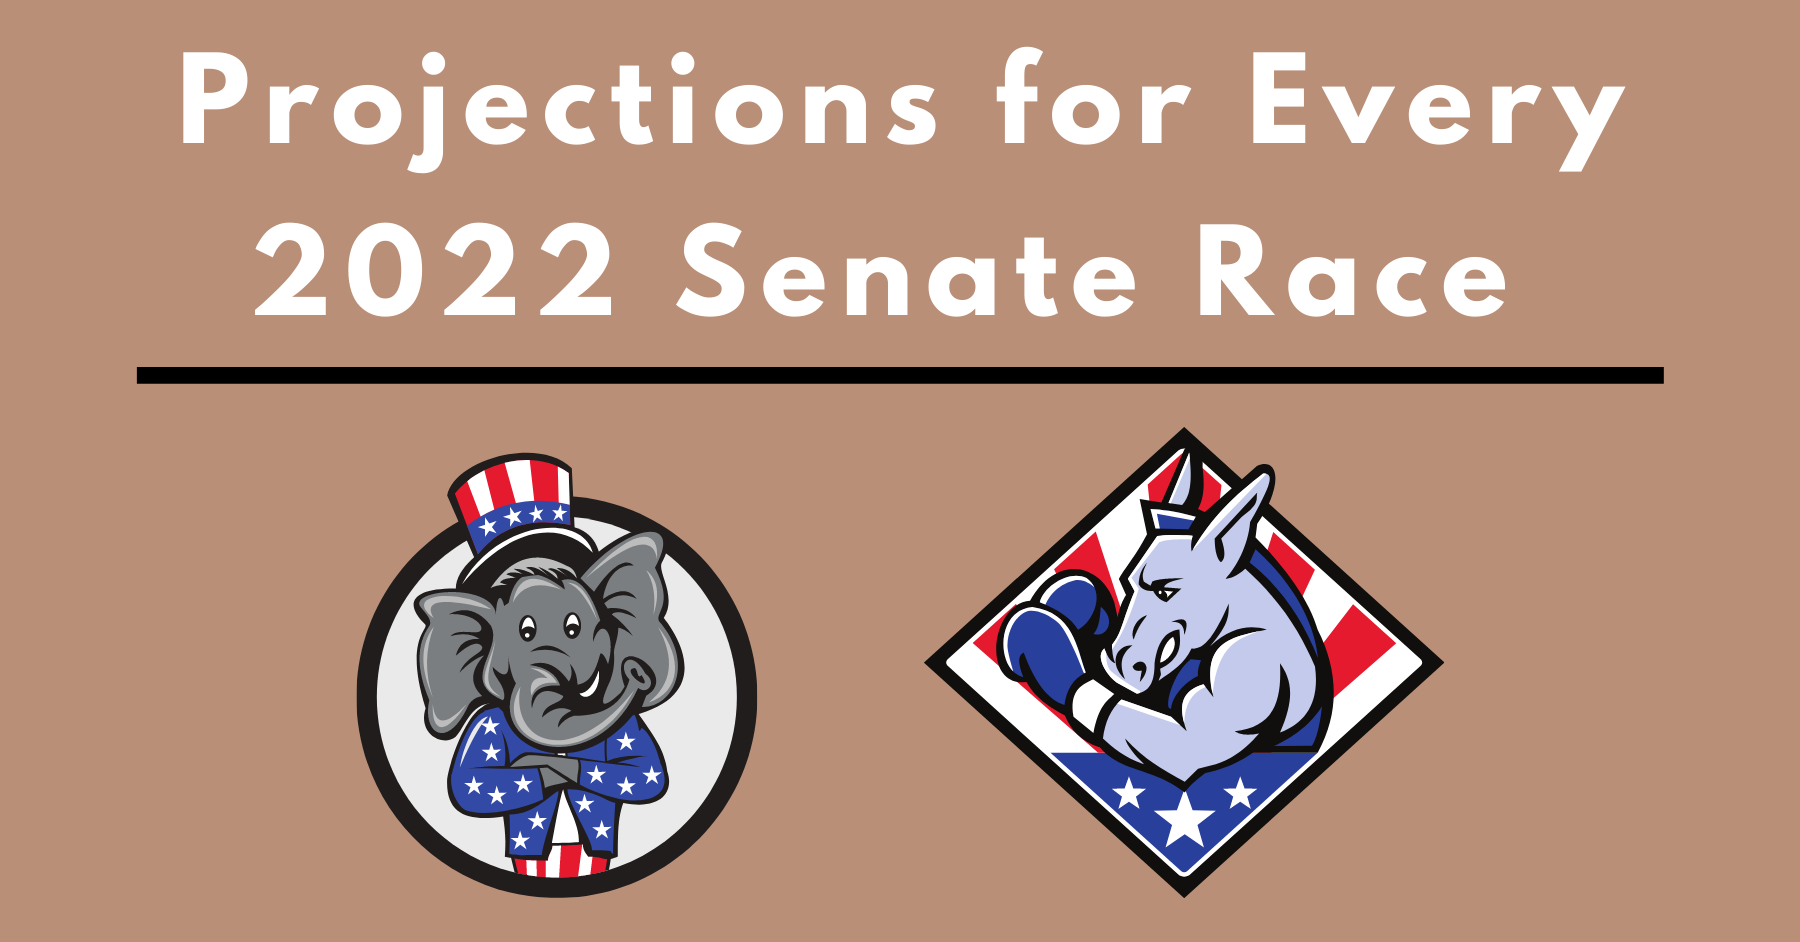 Senate Forecast - Breakdowns of the State of Every Competitive Race in 2022 - including polling, the political landscape, and the incumbent past elections.